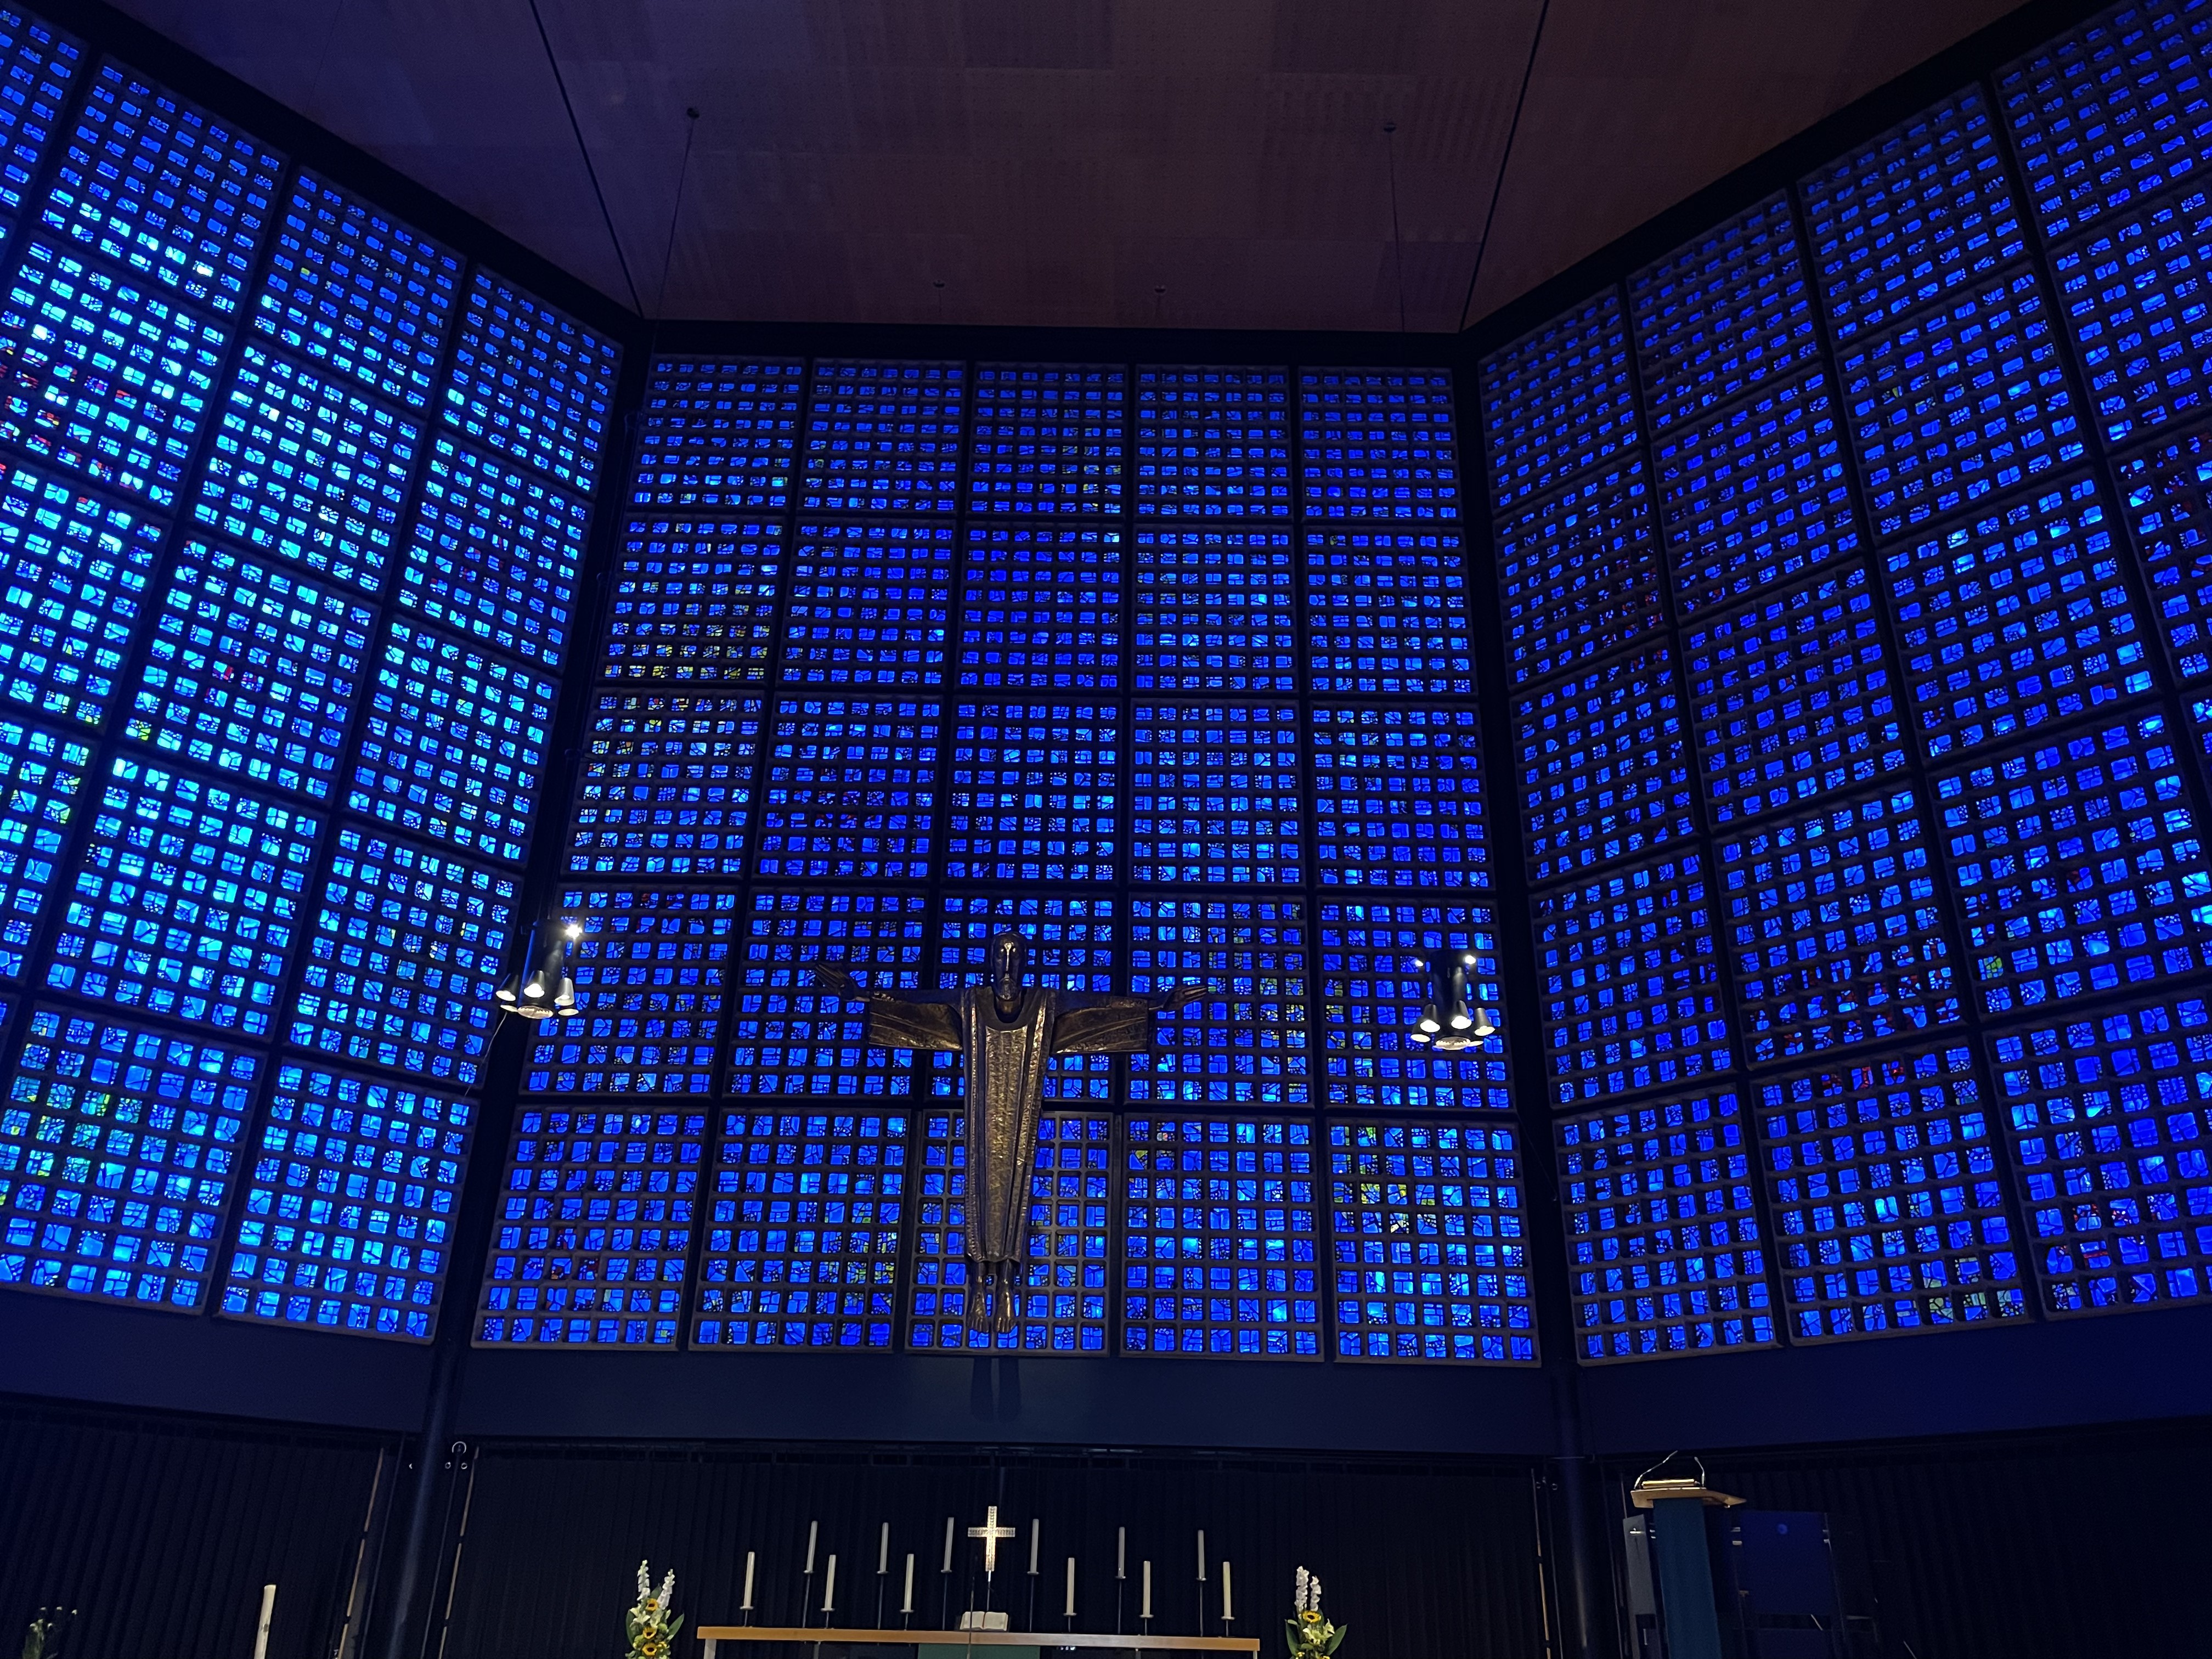 The inside of the modern church structure